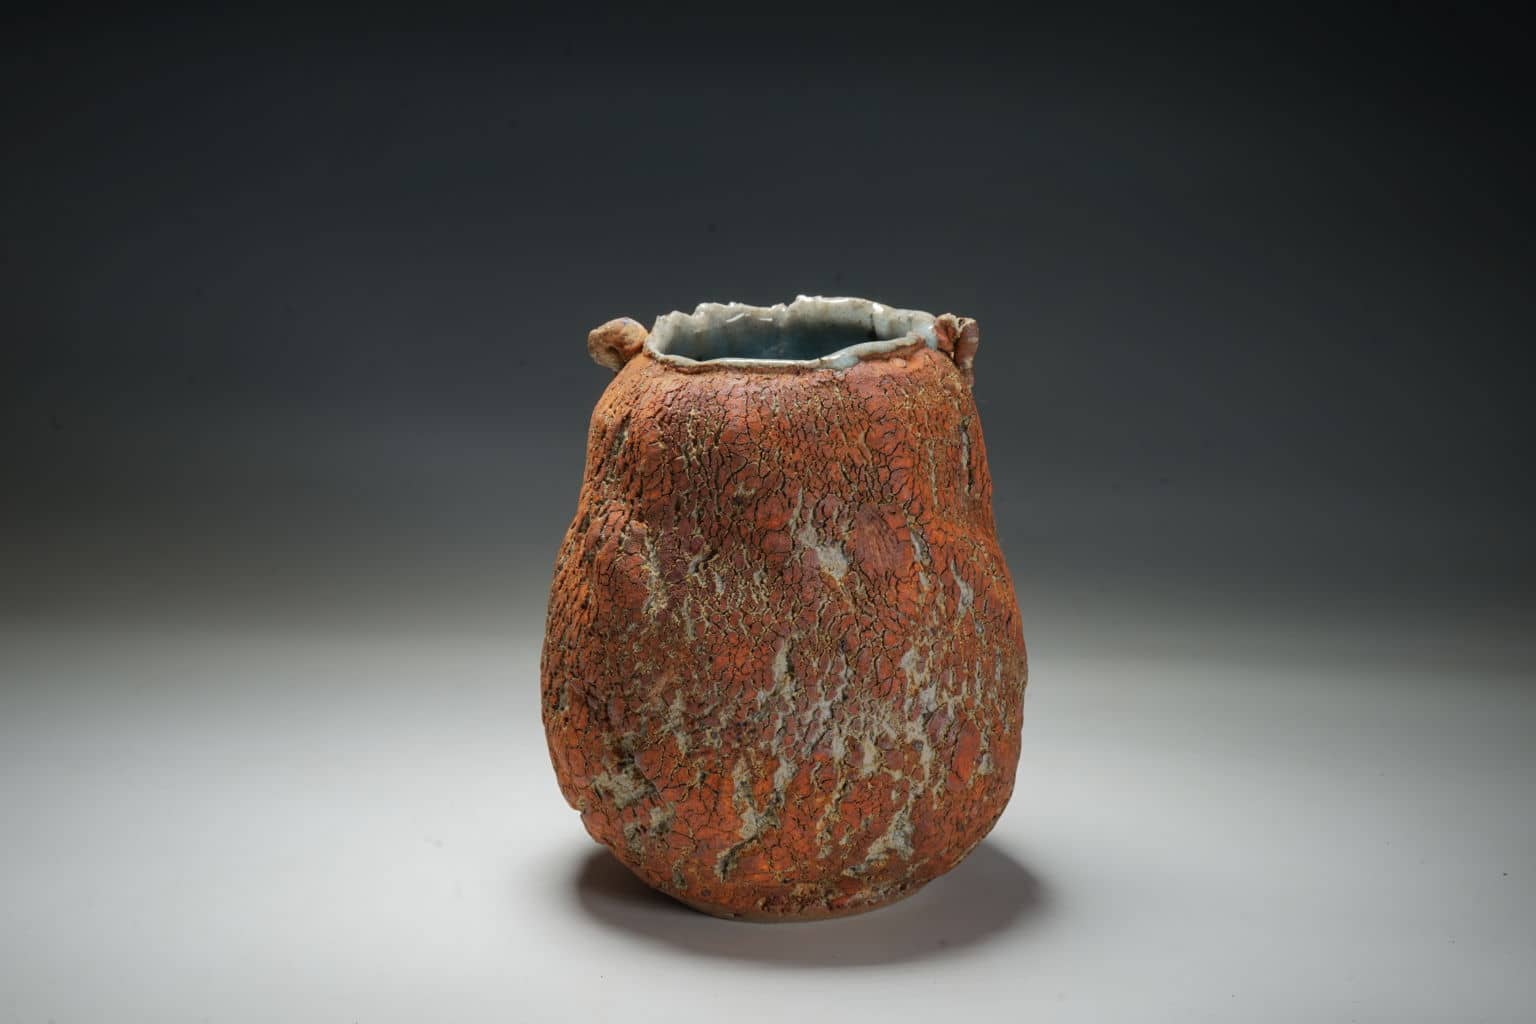 Small Abstract vase with shell imprint .